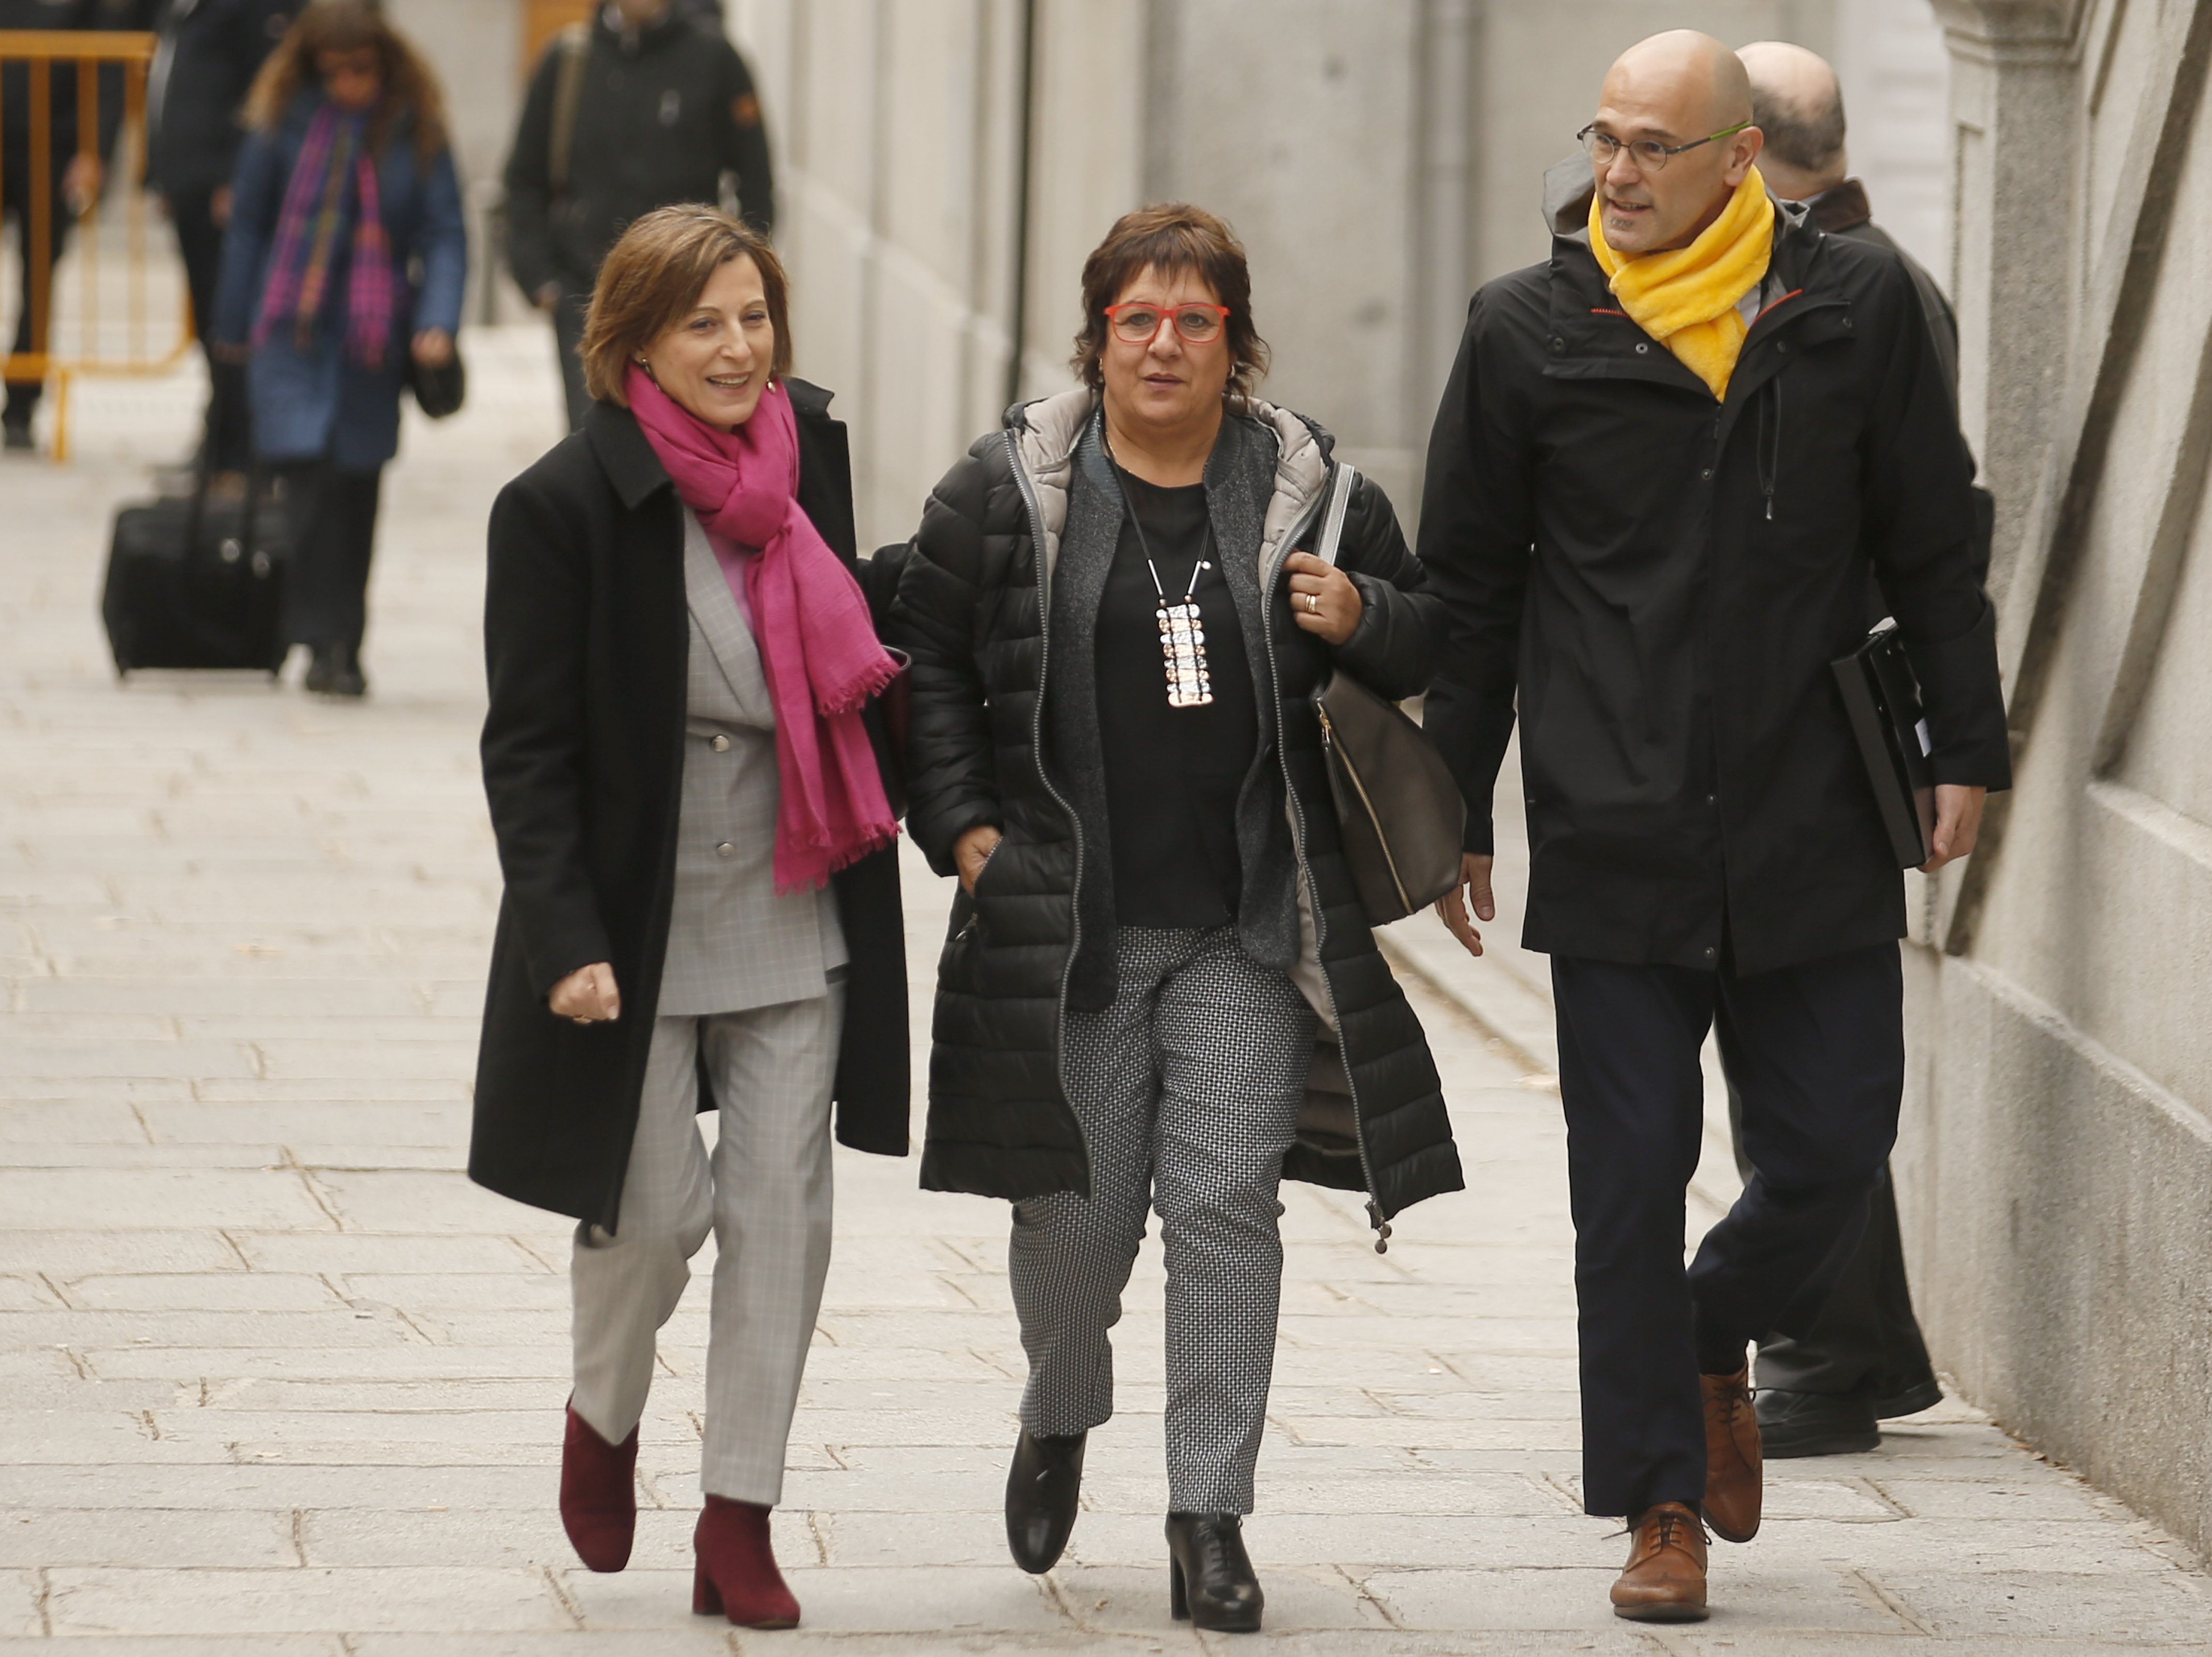 Former Catalan minister Dolors Bassa granted permission to visit mother in hospital